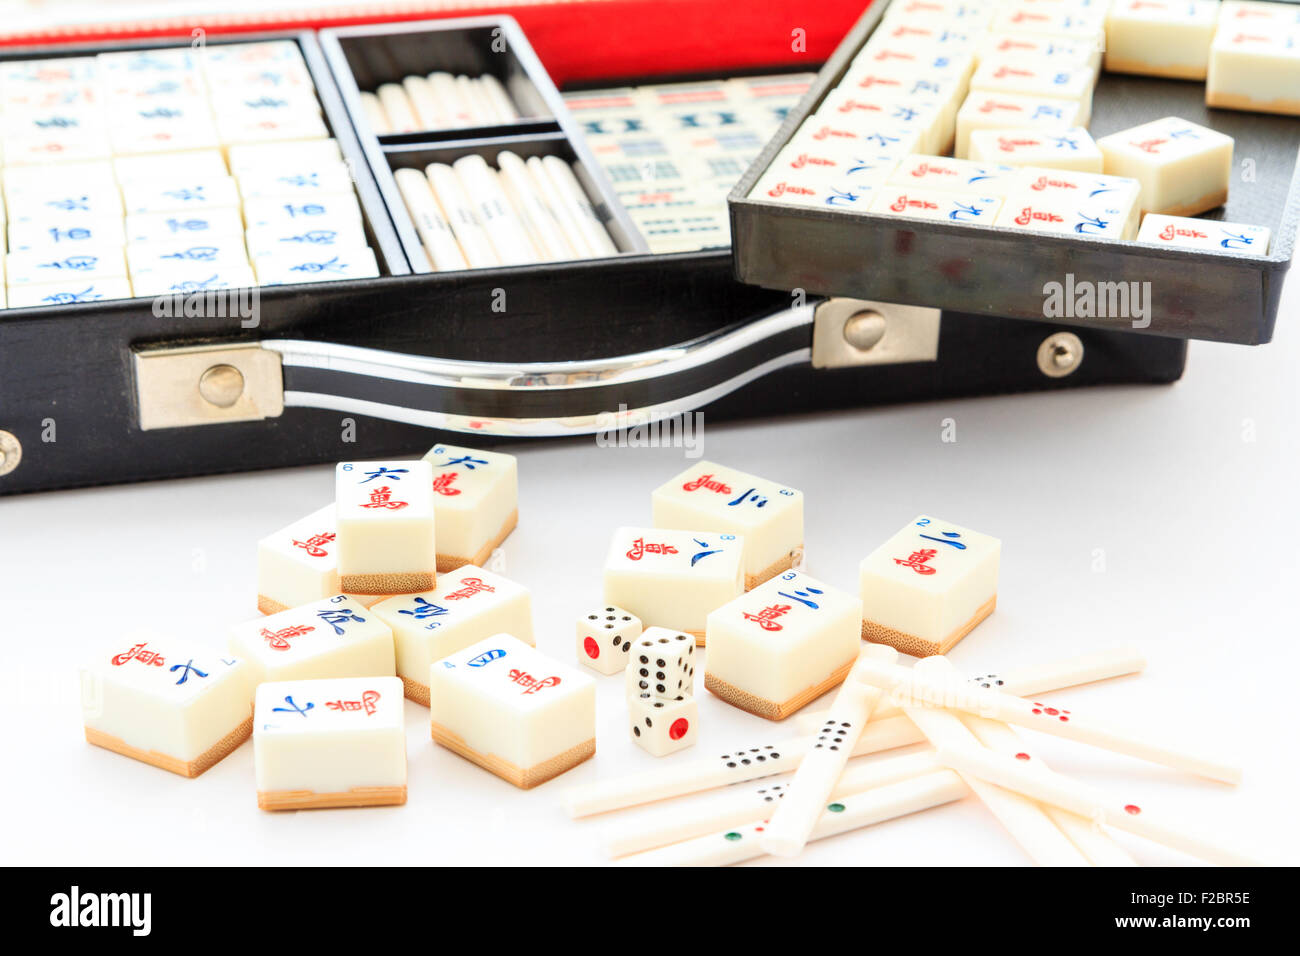 Mahjong, Mah jong gambling box set, open with contents partly remove. Various black trays with sets or suits of cards and tiles plain white background. Stock Photo